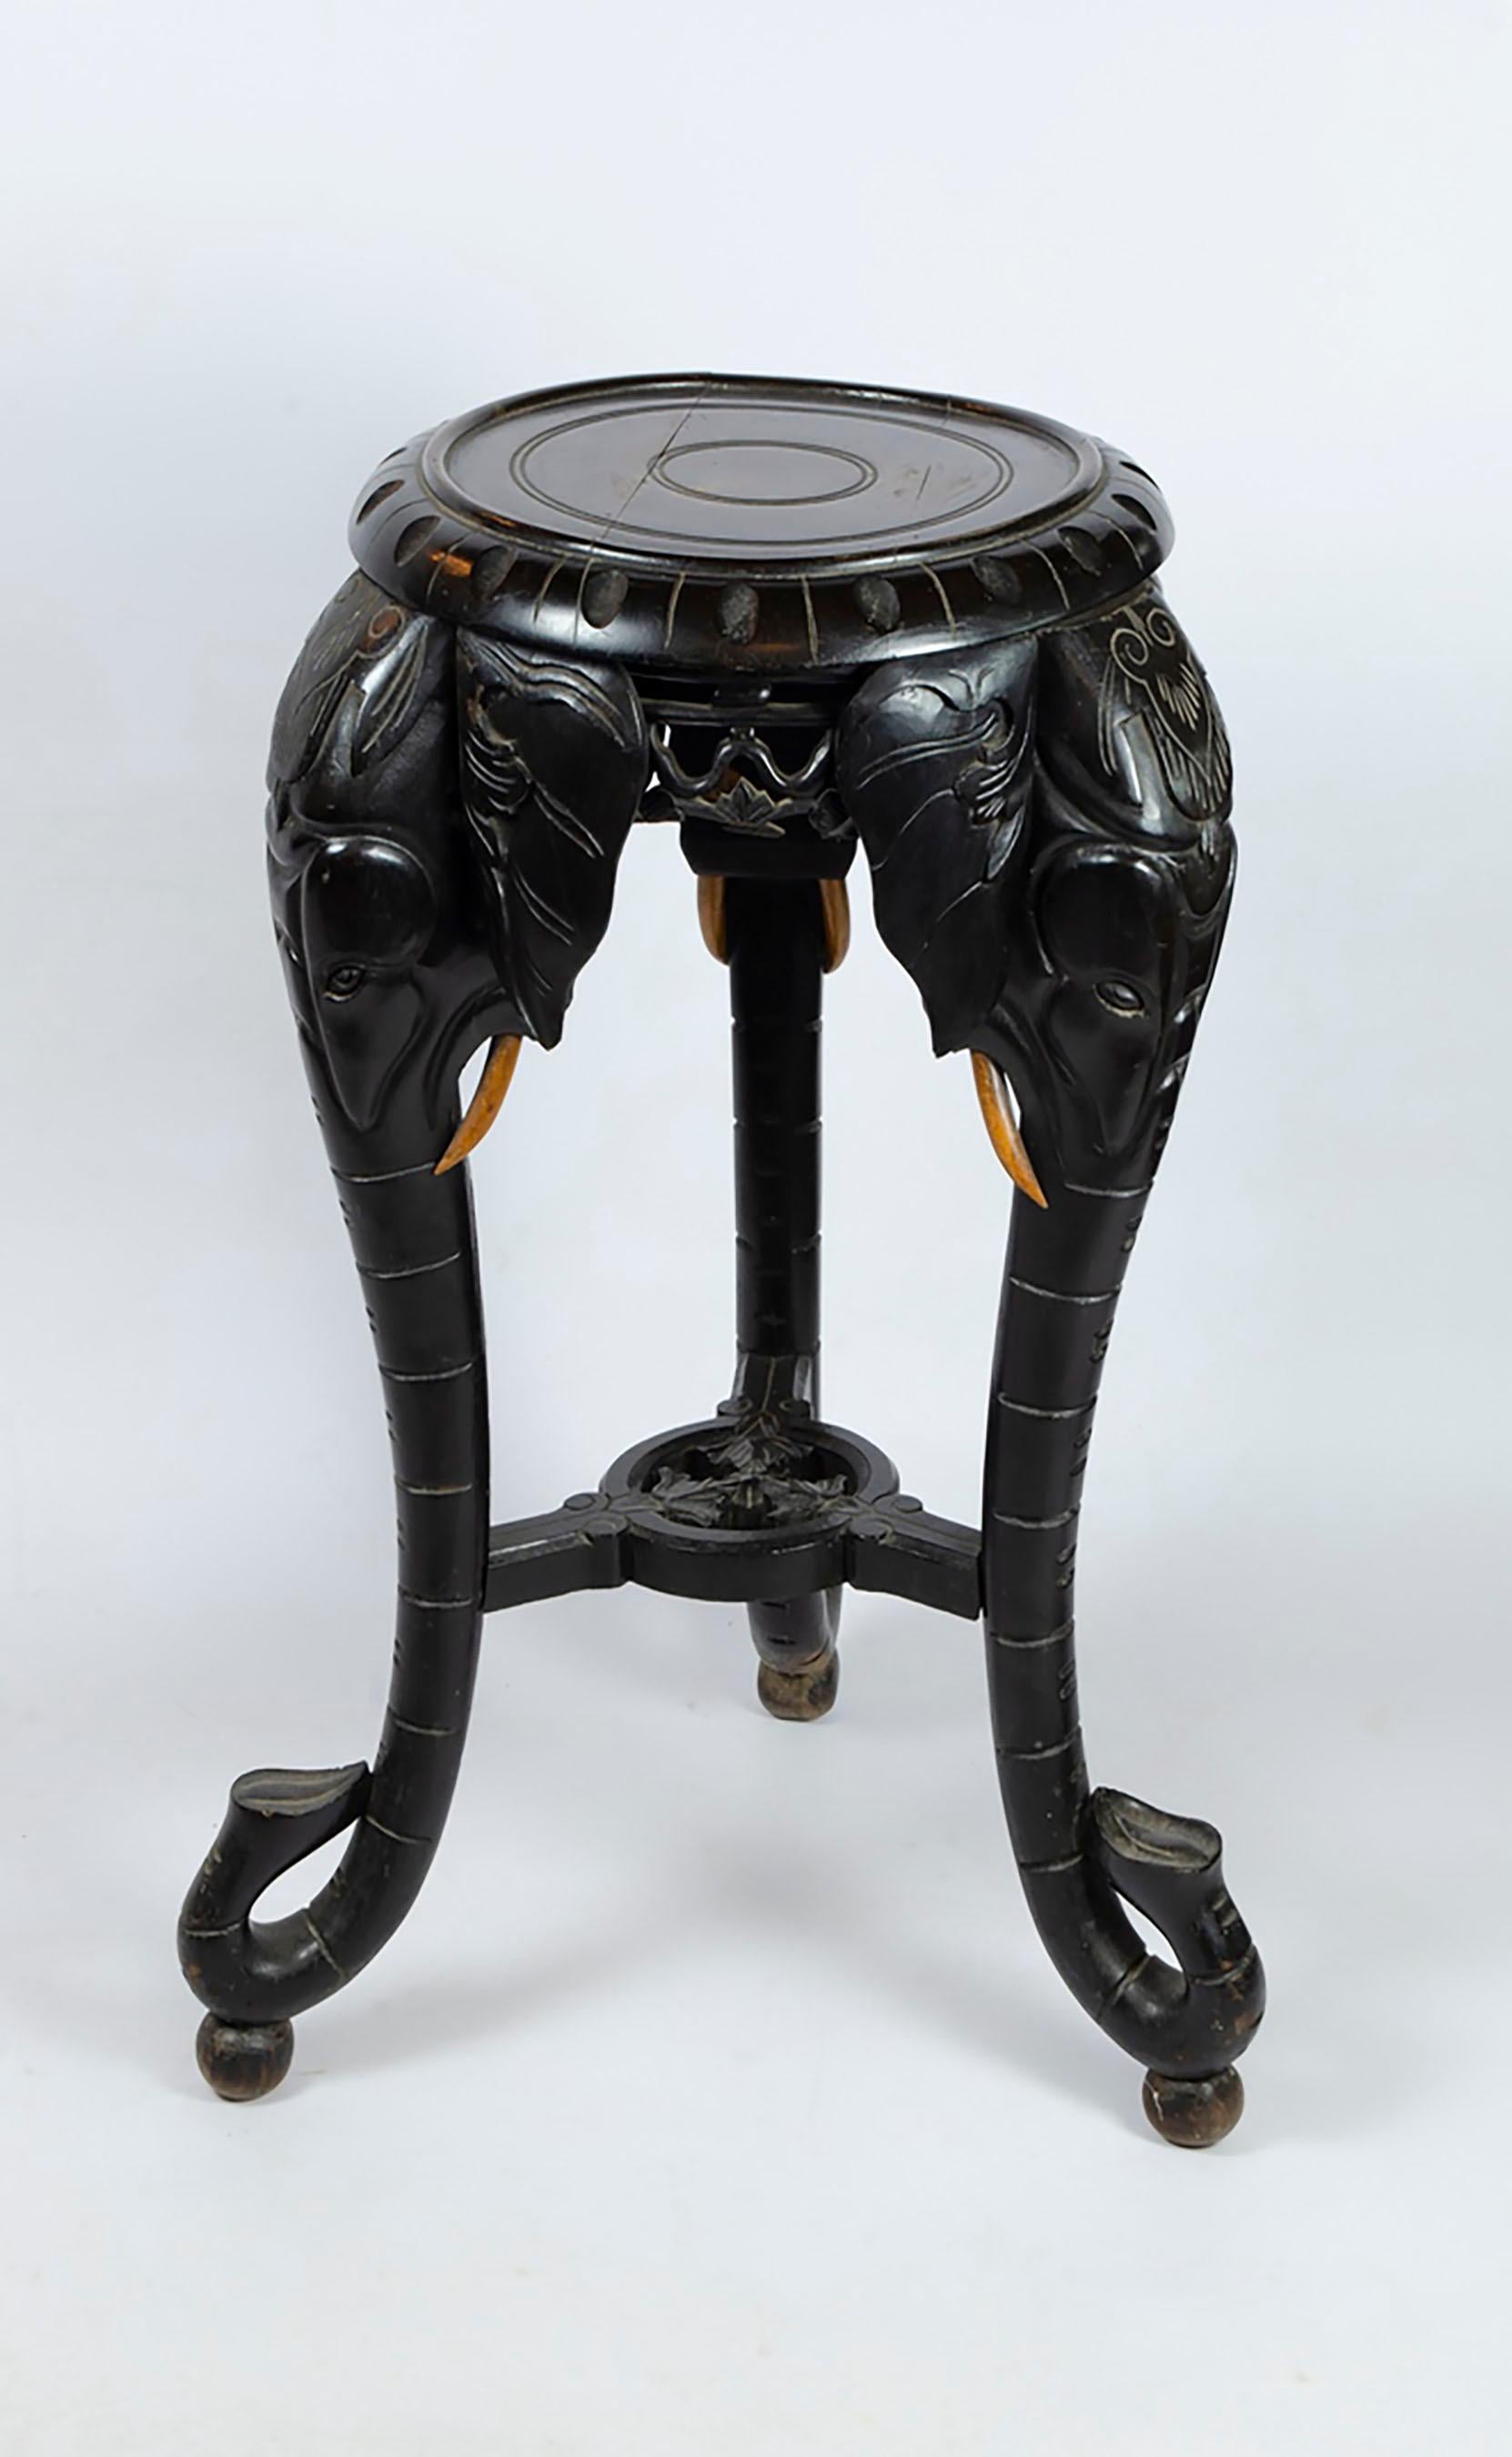 An early 20th century hardwood side table hand carved with beautiful elephant heads/trunks to create the legs of the table. Originally carved in South East Asia, it has a beautifully aged ebonised colouring with original wood colour showing through